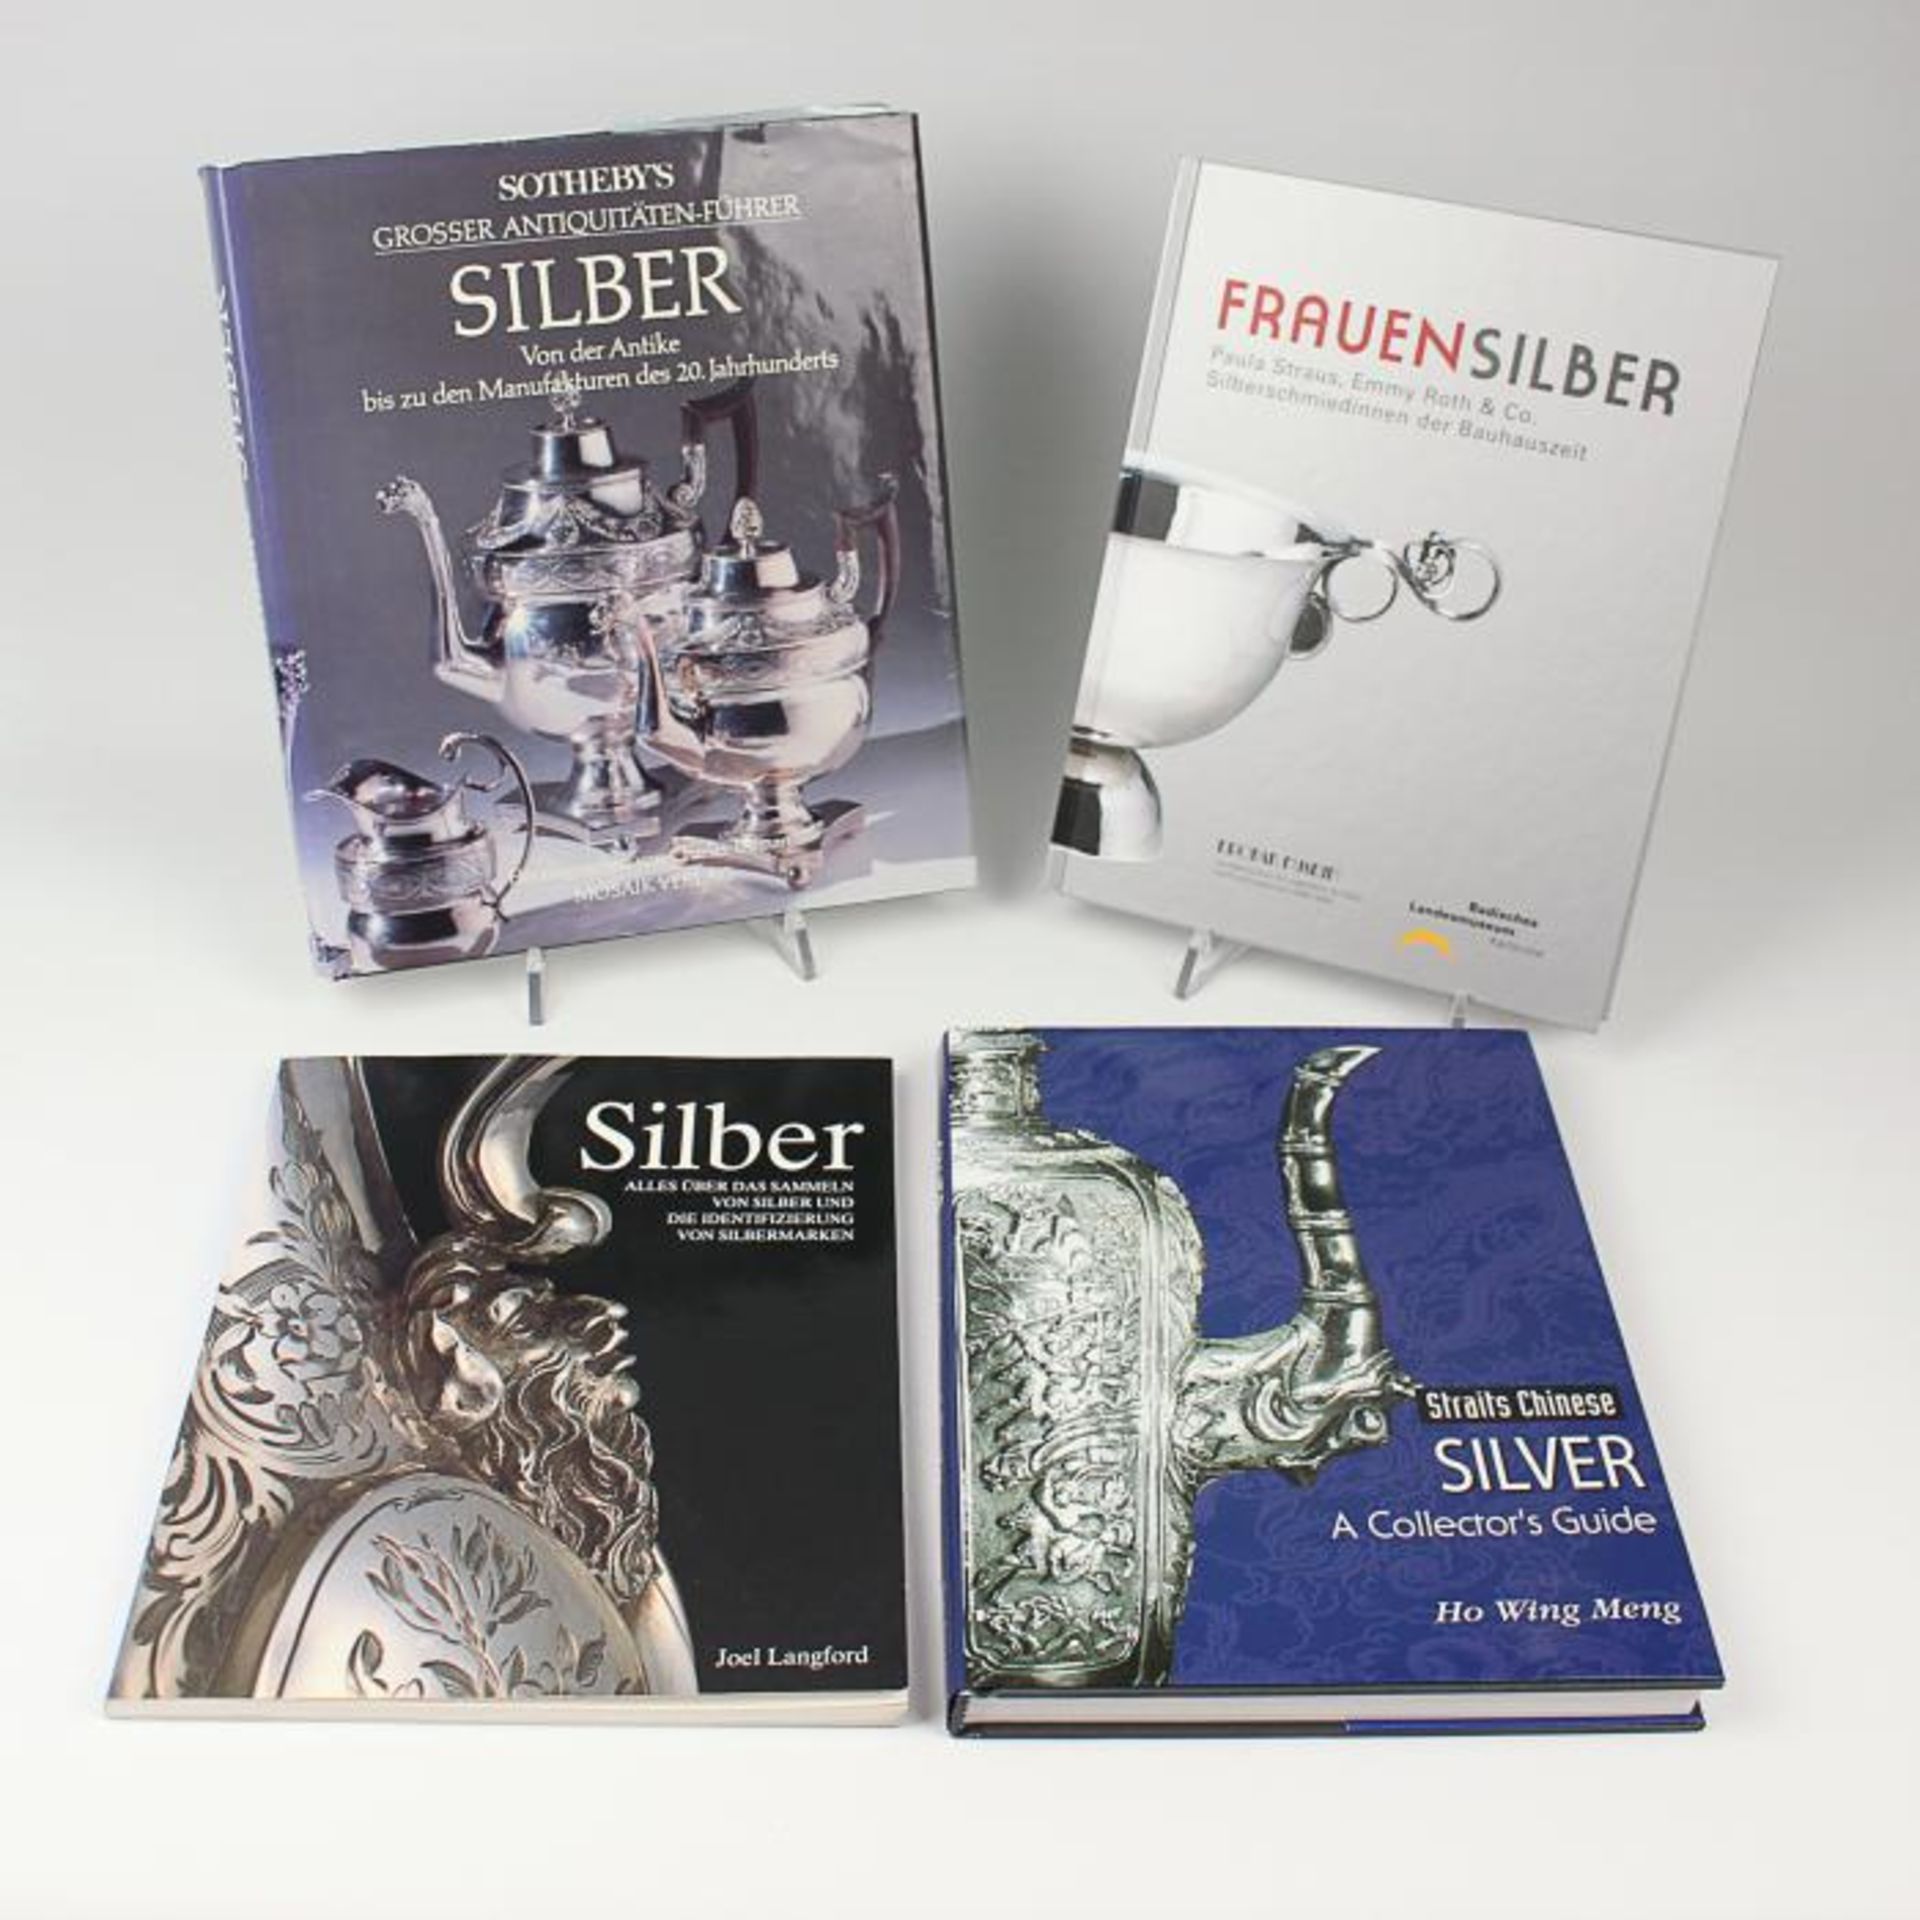 Silber - KonvolutMeng, Ho Wing: "Straits Chinese Silver - A Collector's Guide", englischsprachig,